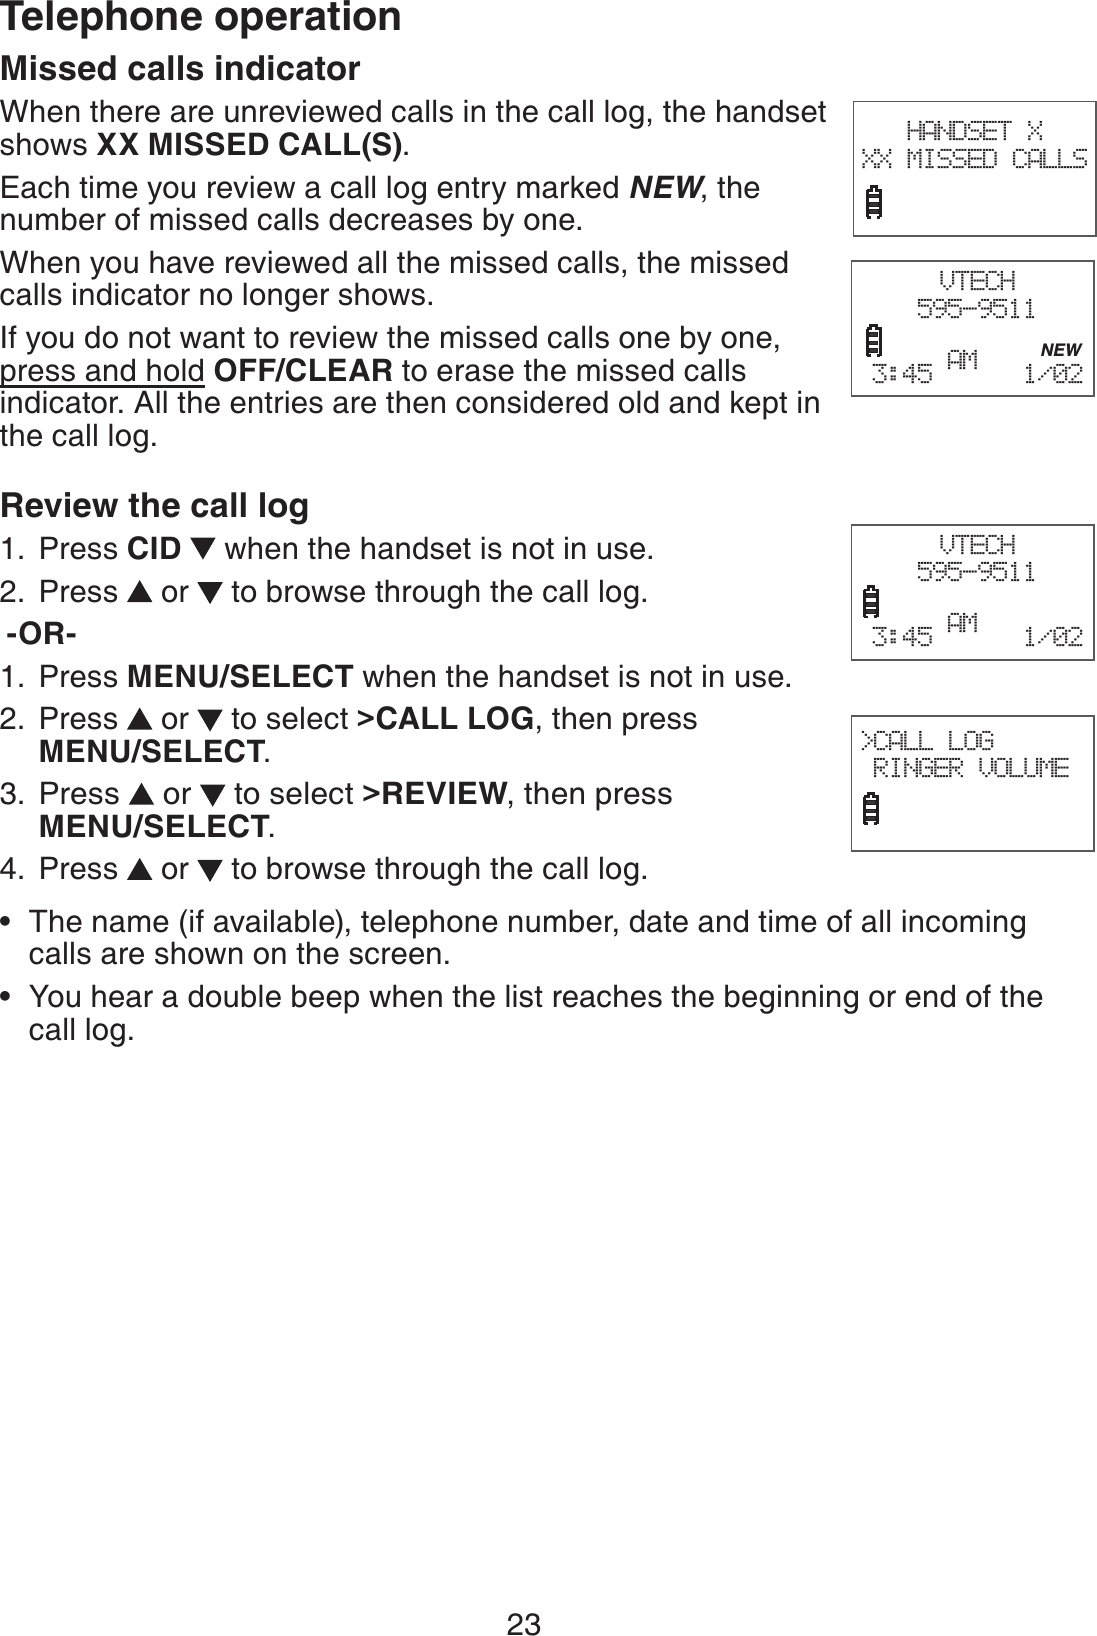 23Telephone operationMissed calls indicator When there are unreviewed calls in the call log, the handset shows XX MISSED CALL(S).Each time you review a call log entry marked NEW, the number of missed calls decreases by one.When you have reviewed all the missed calls, the missed calls indicator no longer shows.If you do not want to review the missed calls one by one, press and hold OFF/CLEAR to erase the missed calls indicator. All the entries are then considered old and kept in the call log. Review the call log Press CID   when the handset is not in use.Press   or   to browse through the call log. -OR-Press MENU/SELECT when the handset is not in use.Press   or   to select &gt;CALL LOG, then press  MENU/SELECT.Press   or   to select &gt;REVIEW, then press  MENU/SELECT.Press   or   to browse through the call log.The name (if available), telephone number, date and time of all incoming calls are shown on the screen.You hear a double beep when the list reaches the beginning or end of the call log.1.2.1.2.3.4.••HANDSET X XX MISSED CALLSVTECH595-9511           NEW3:45 AM   1/02  VTECH595-9511        3:45 AM   1/02  &gt;CALL LOG RINGER VOLUME